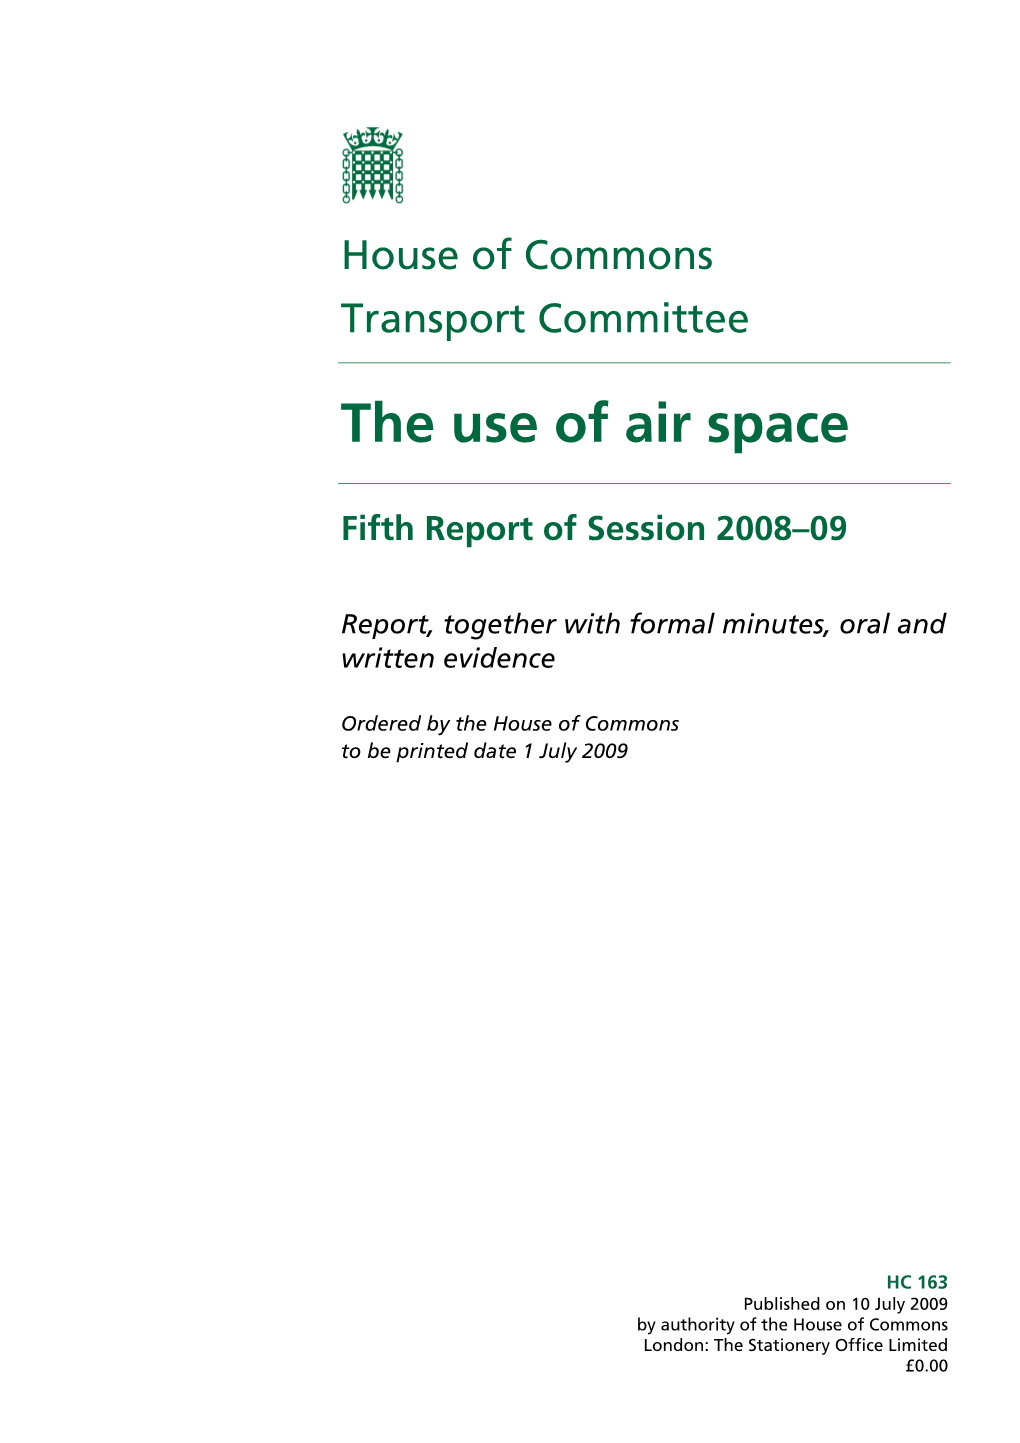 The Use of Air Space